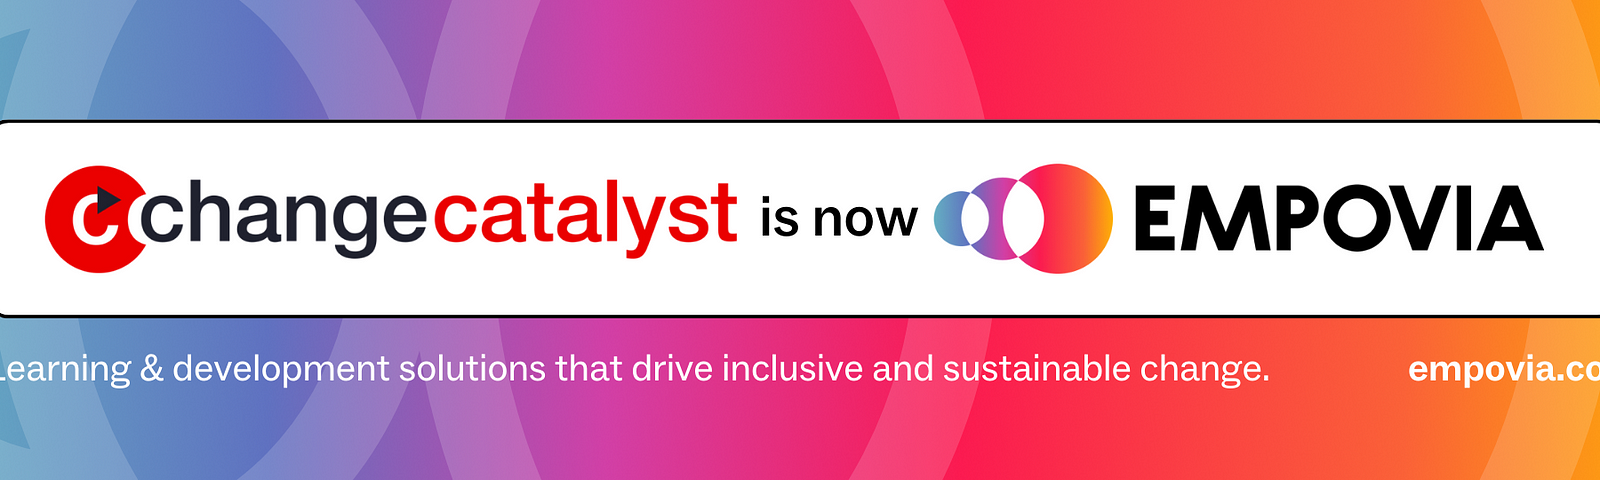 Text reads “Change Catalyst is now Empovia: Learning & Development Solutions that drive inclusive and sustainable change. empovia.co.” Background is a rainbow color from blue to yellow. Change Catalyst and Empovial logos are included.